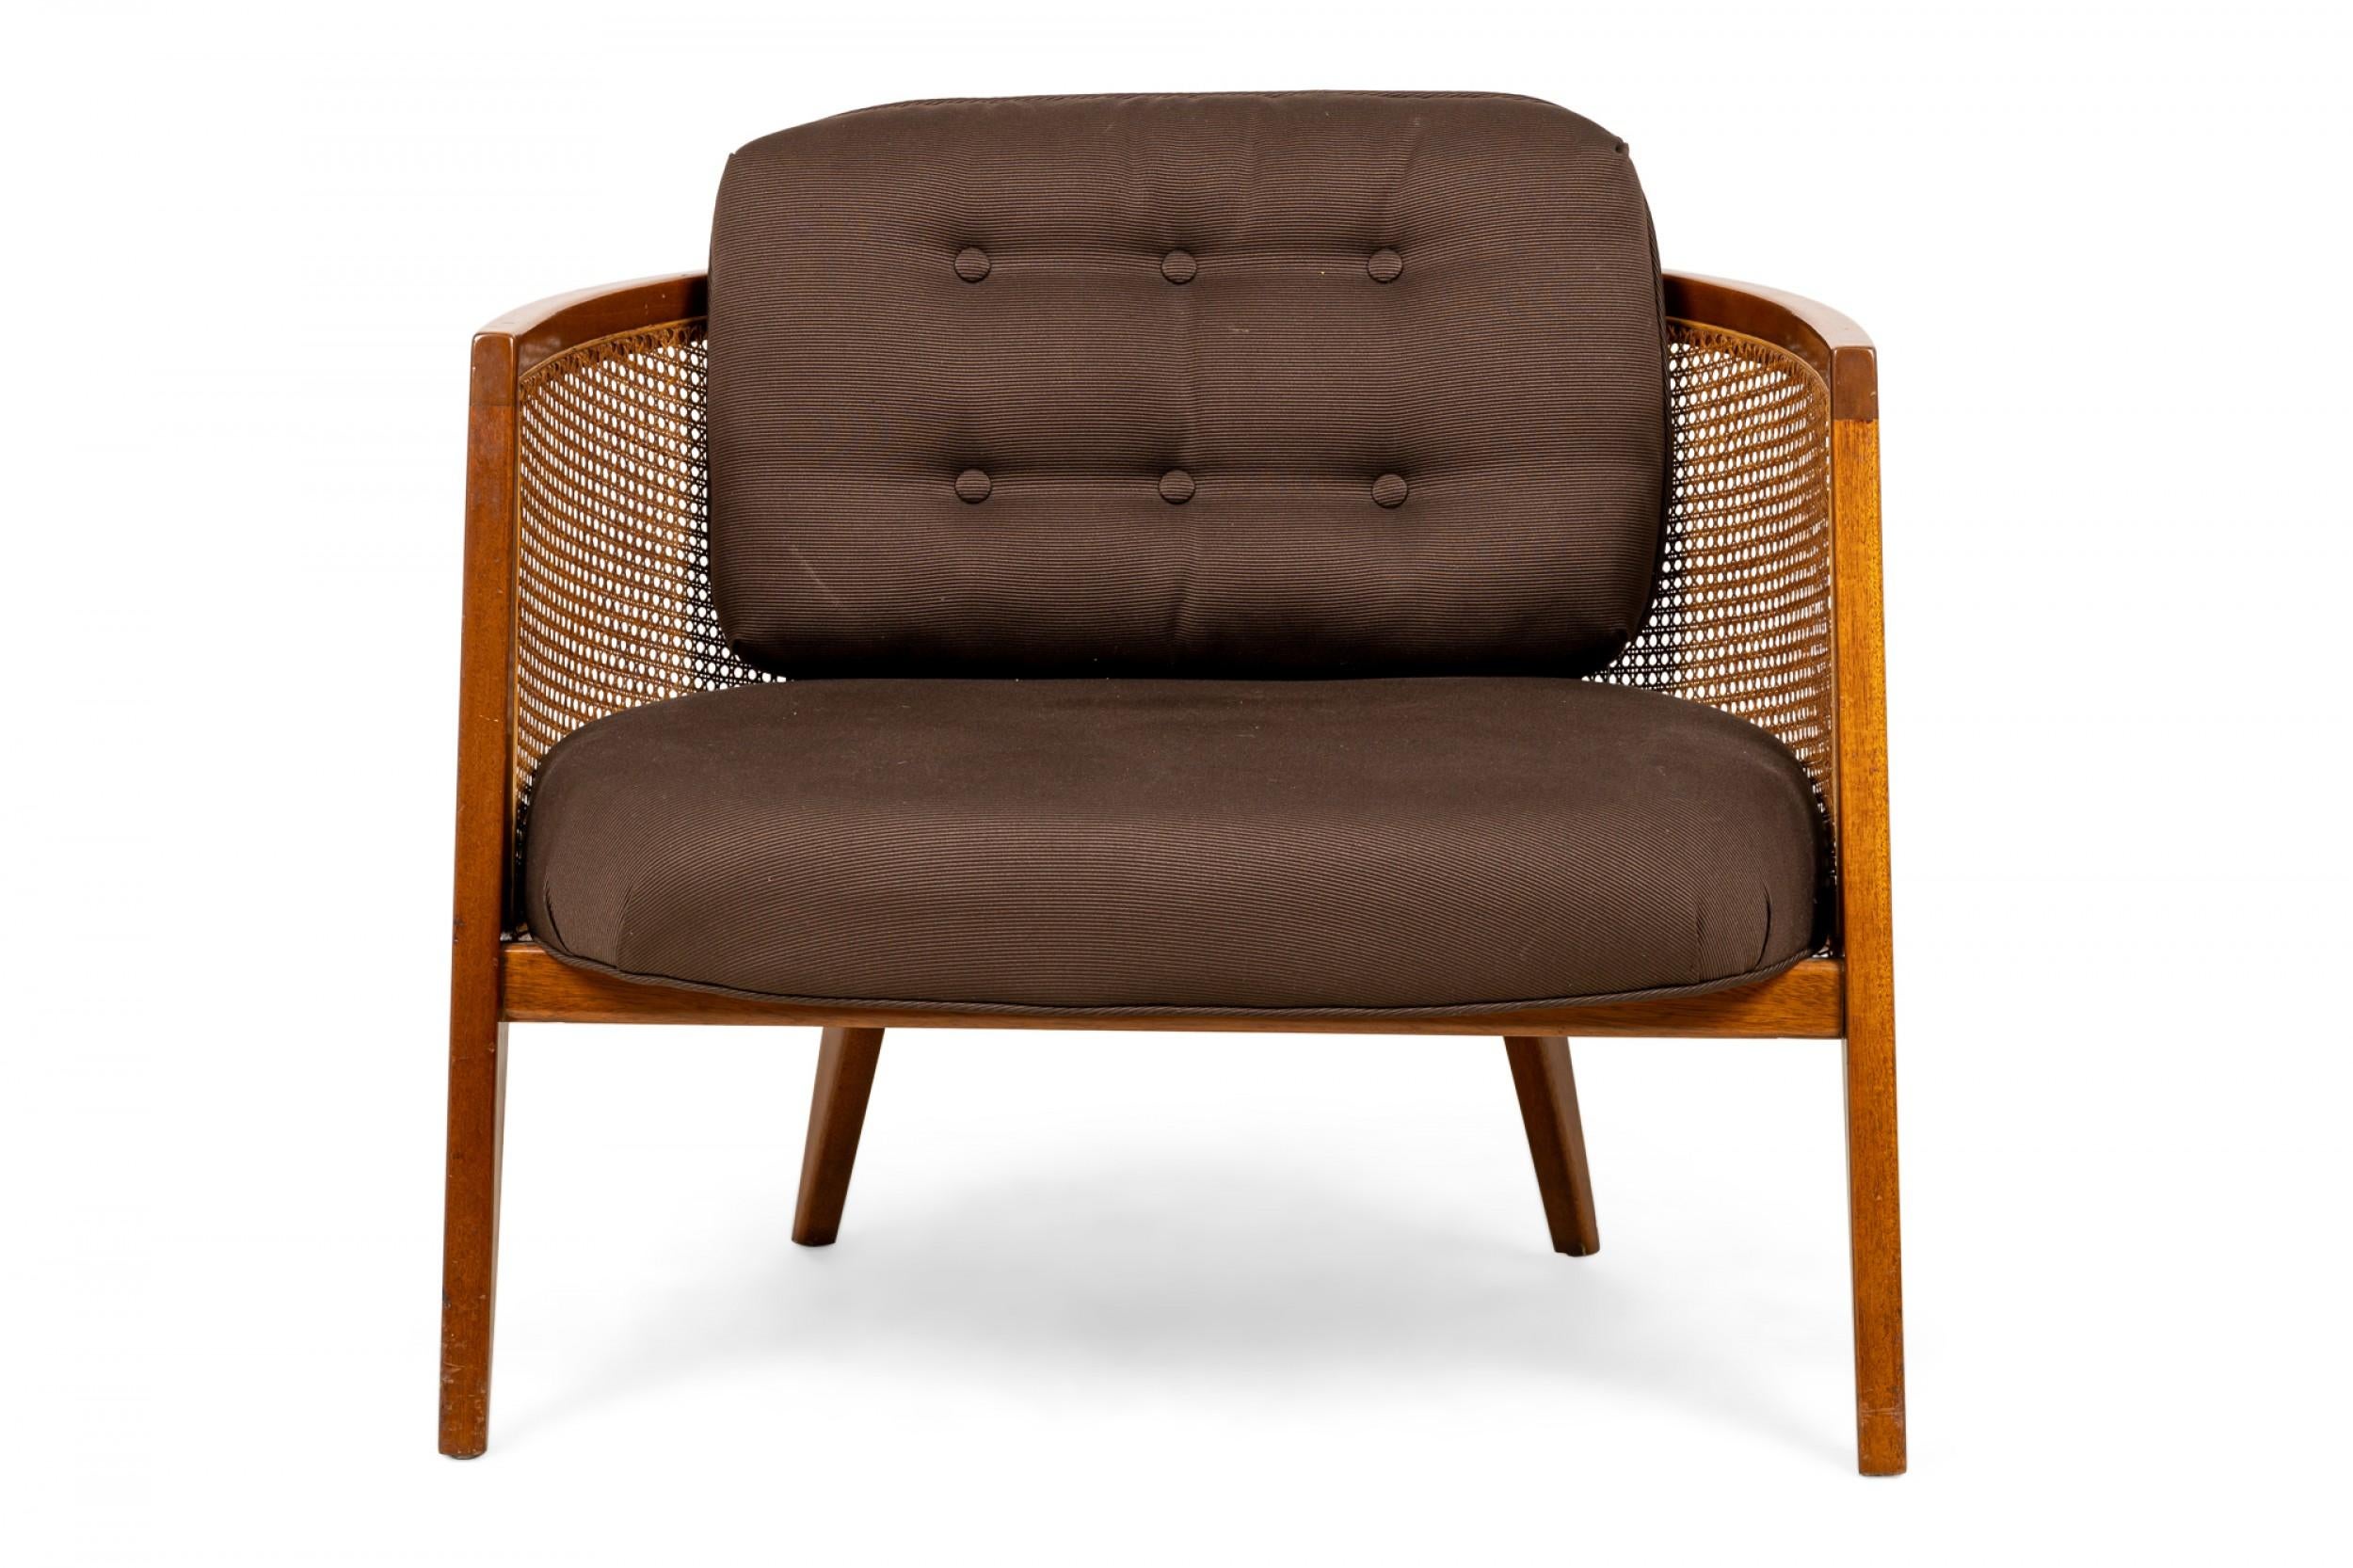 American mid-century hoop form lounge armchair with a curved wooden frame, caned back, seat, and sides, and a dark brown fabric upholstered seat cushion and matching back cushion with button tufted detail, resting on four angled tapered square legs.